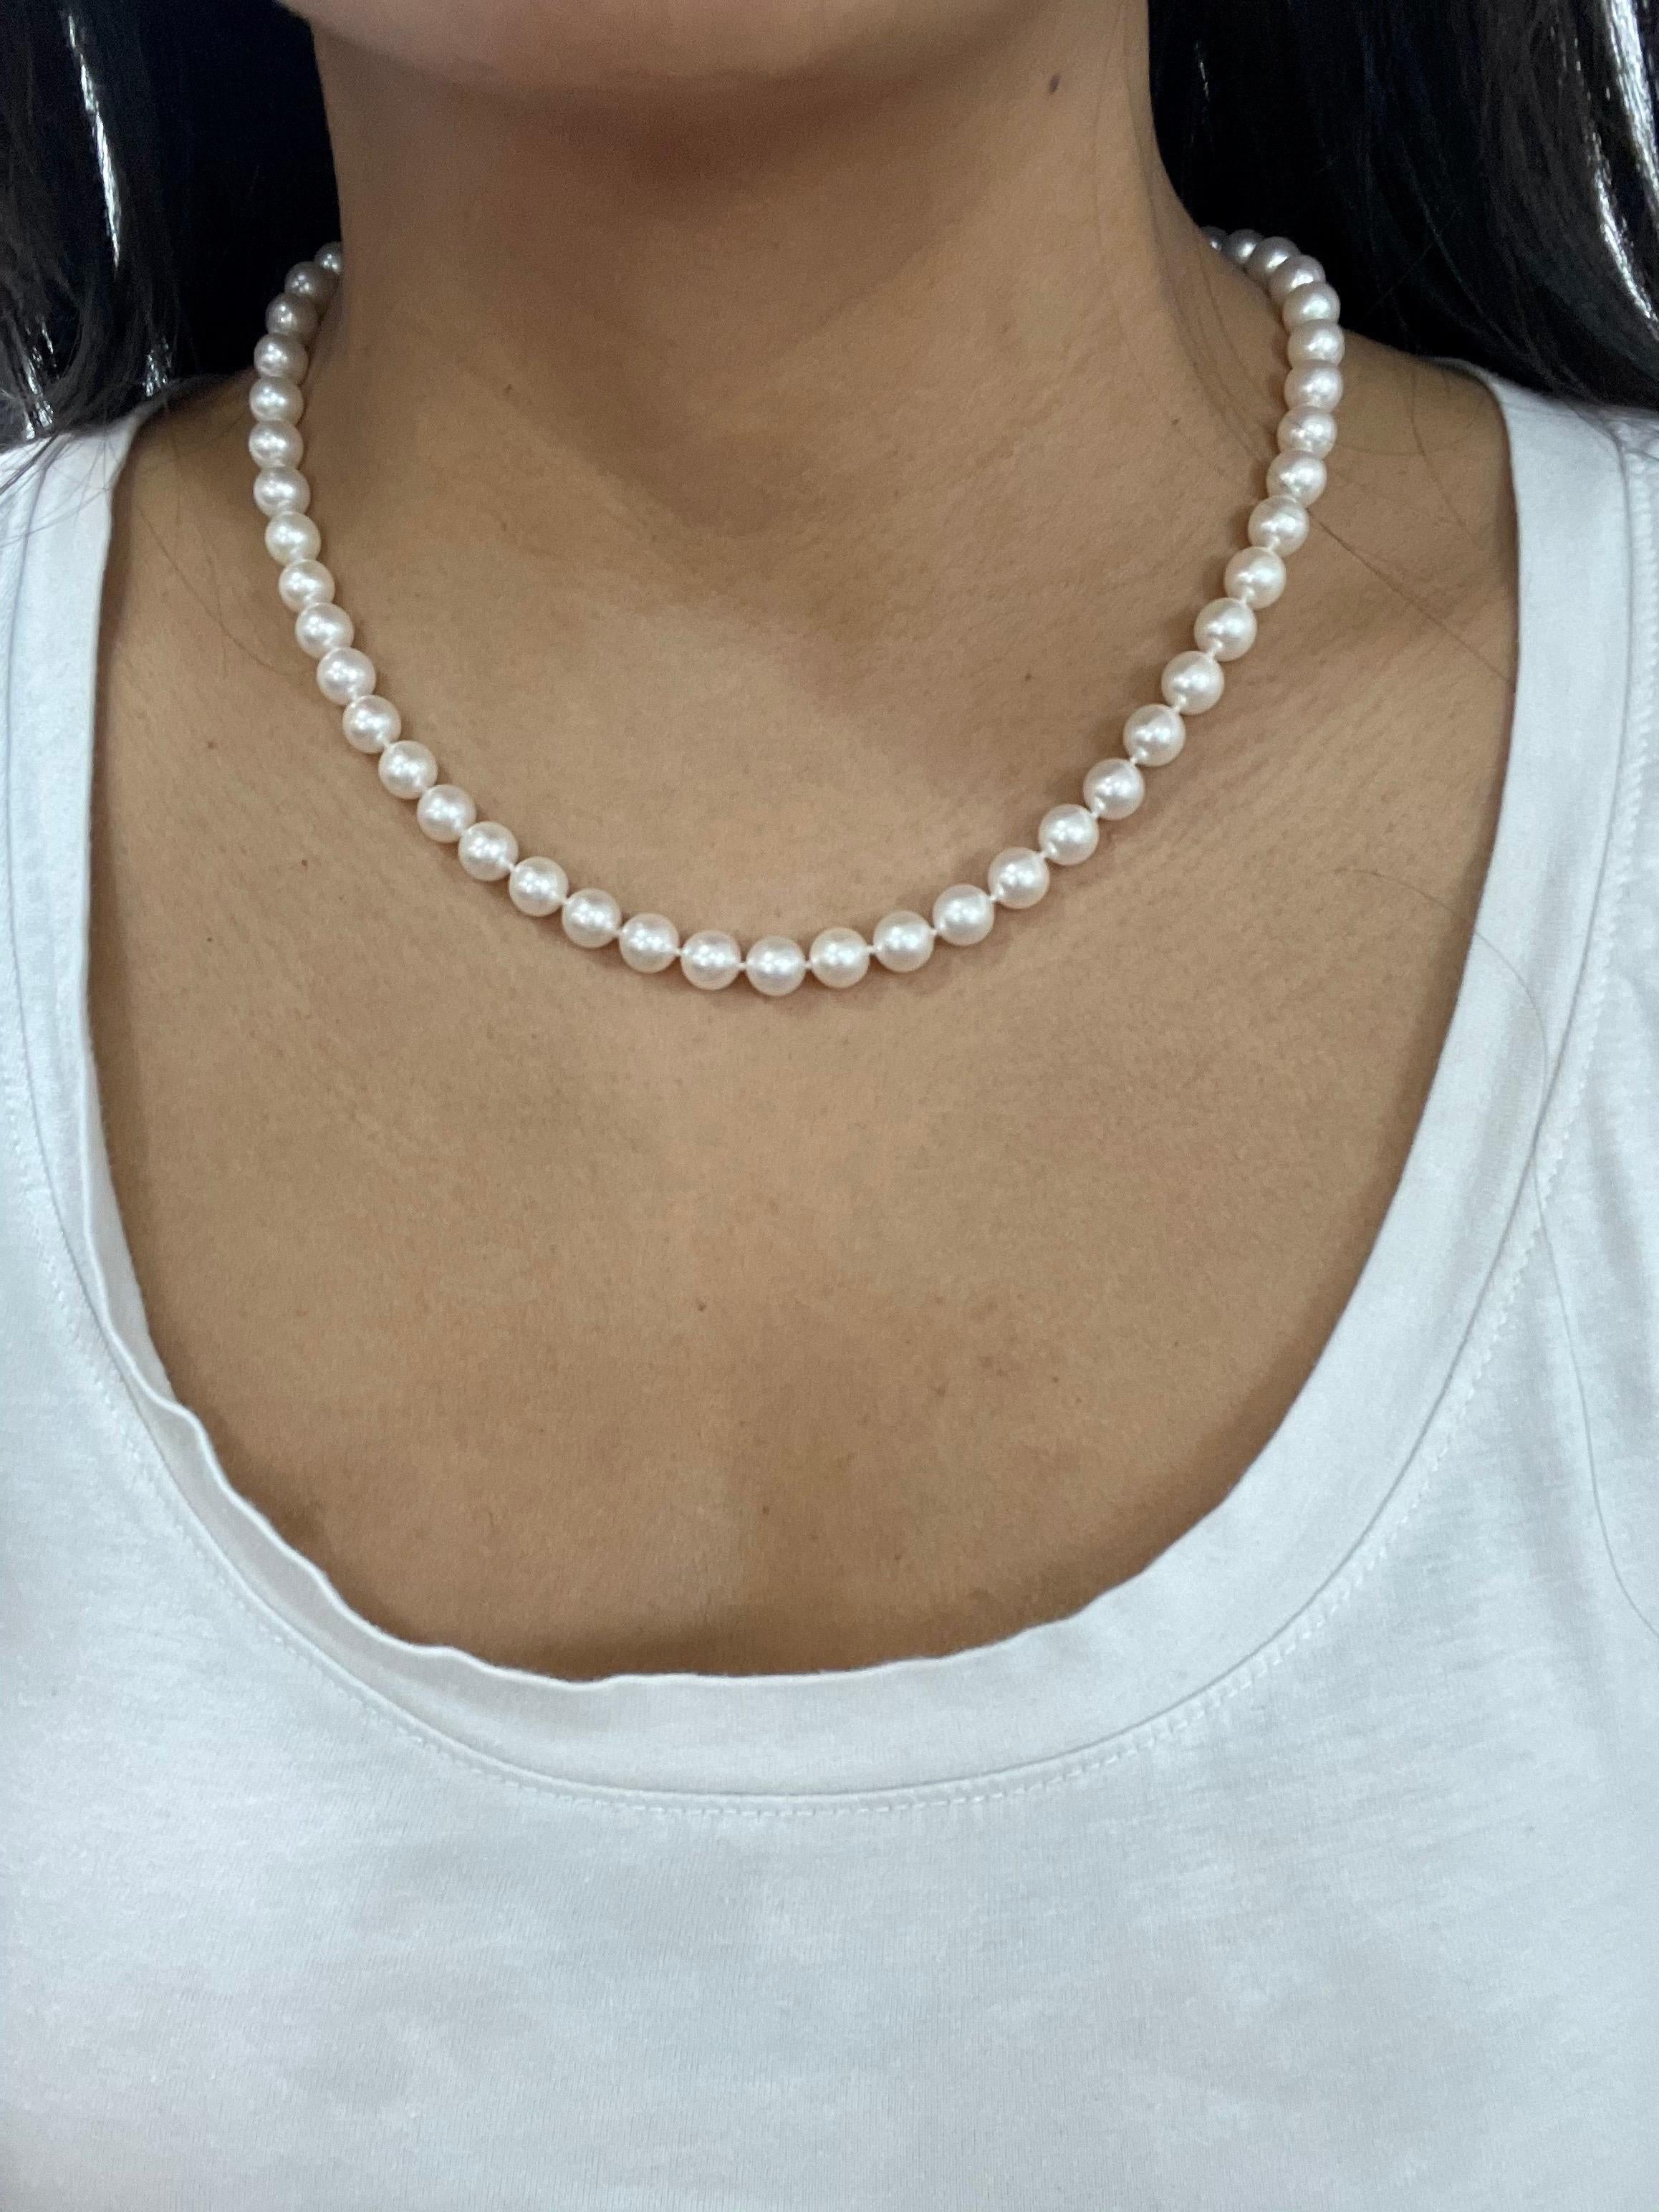 Blue Lagoon Mikimoto Pearl Necklace & Earrings sold at auction on 21st June  | Everard Auctions and Appraisals